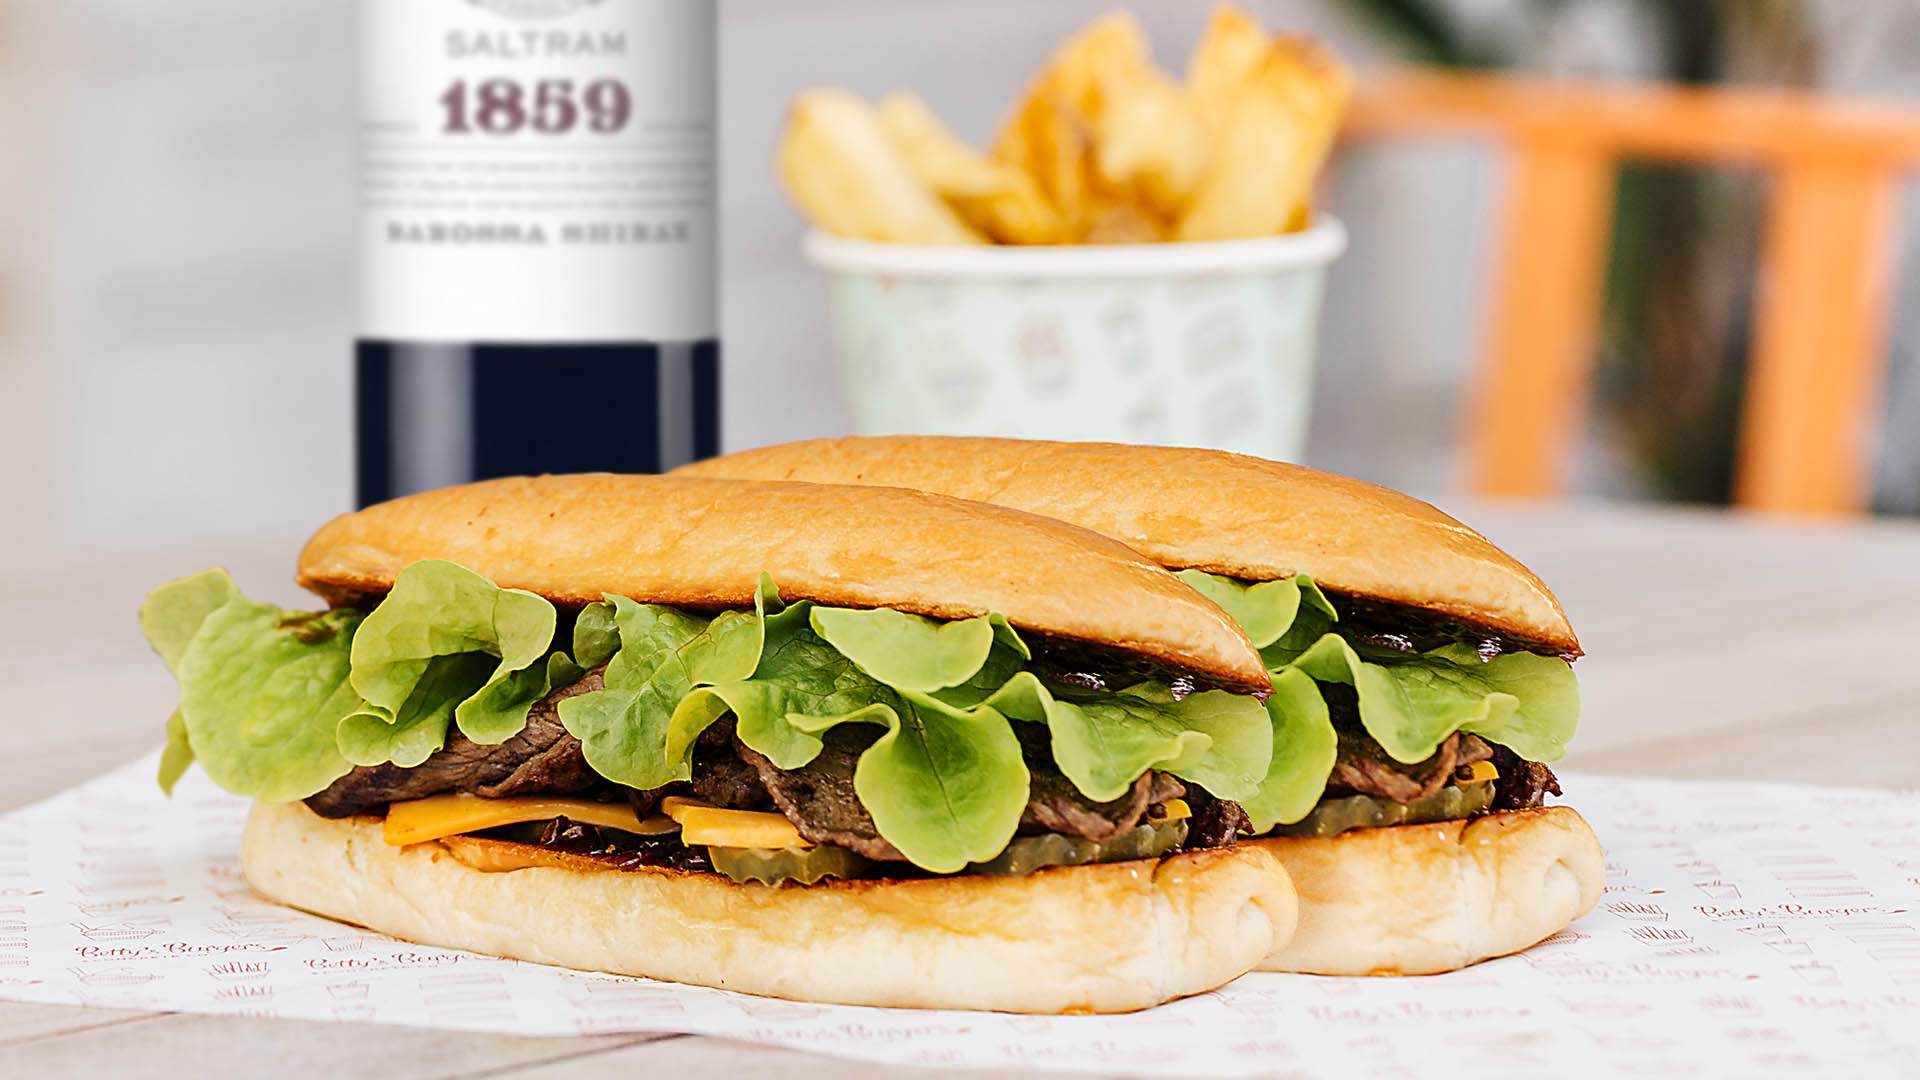 Betty's Burgers Has Added a Limited-Edition Steak Sandwich to Its Menu